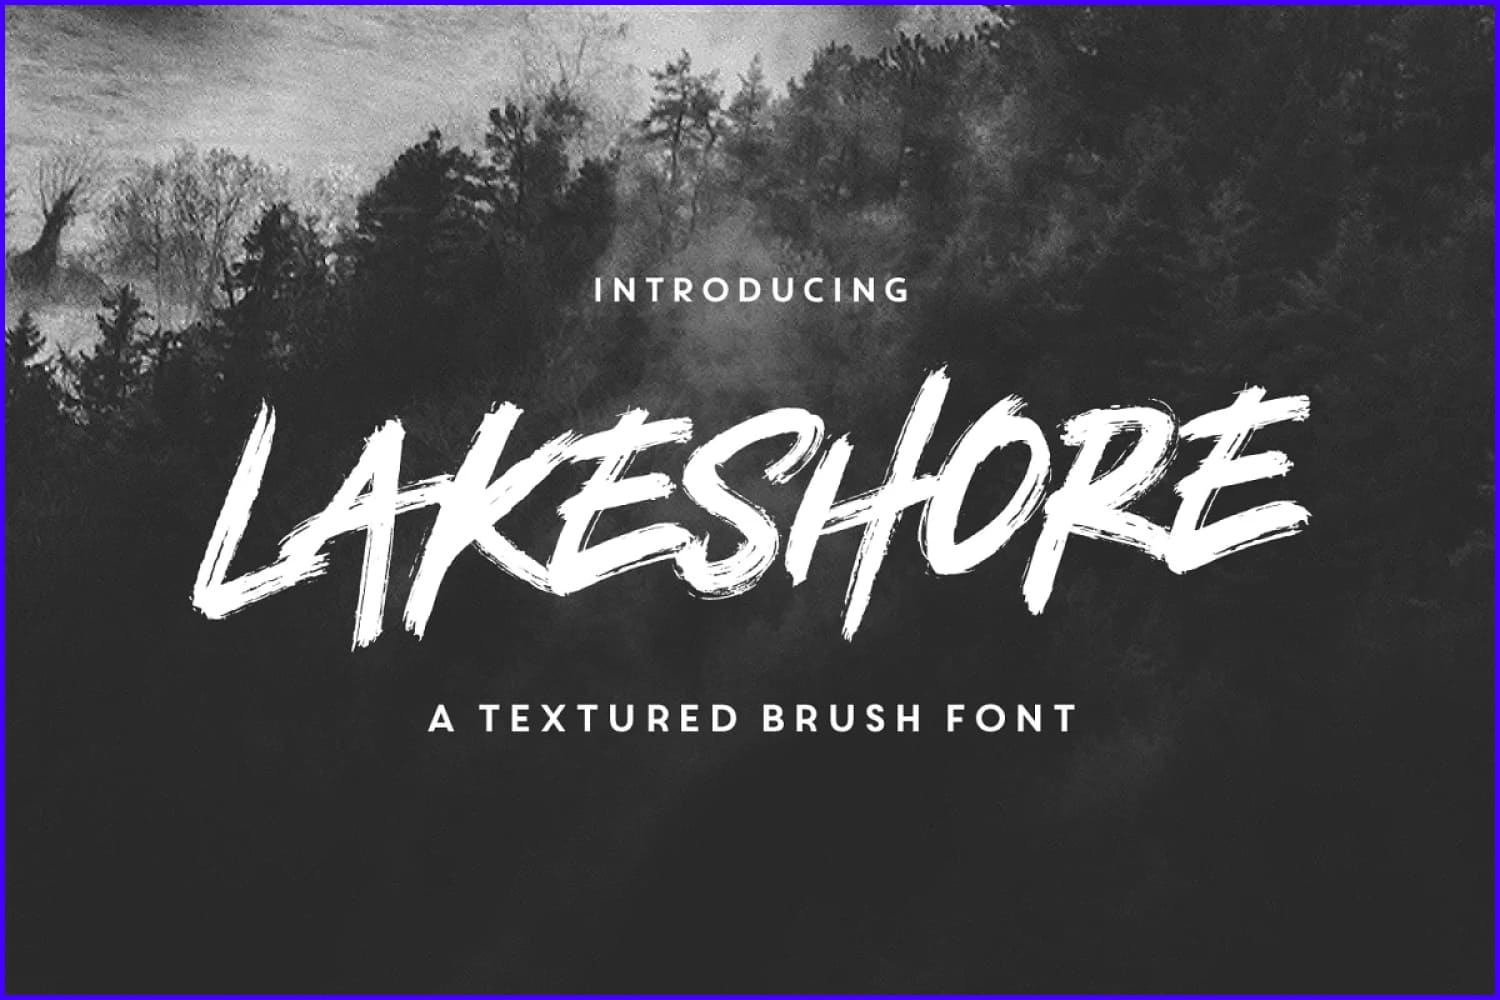 Text Lakeshore on the background of a black and white photo of the forest.